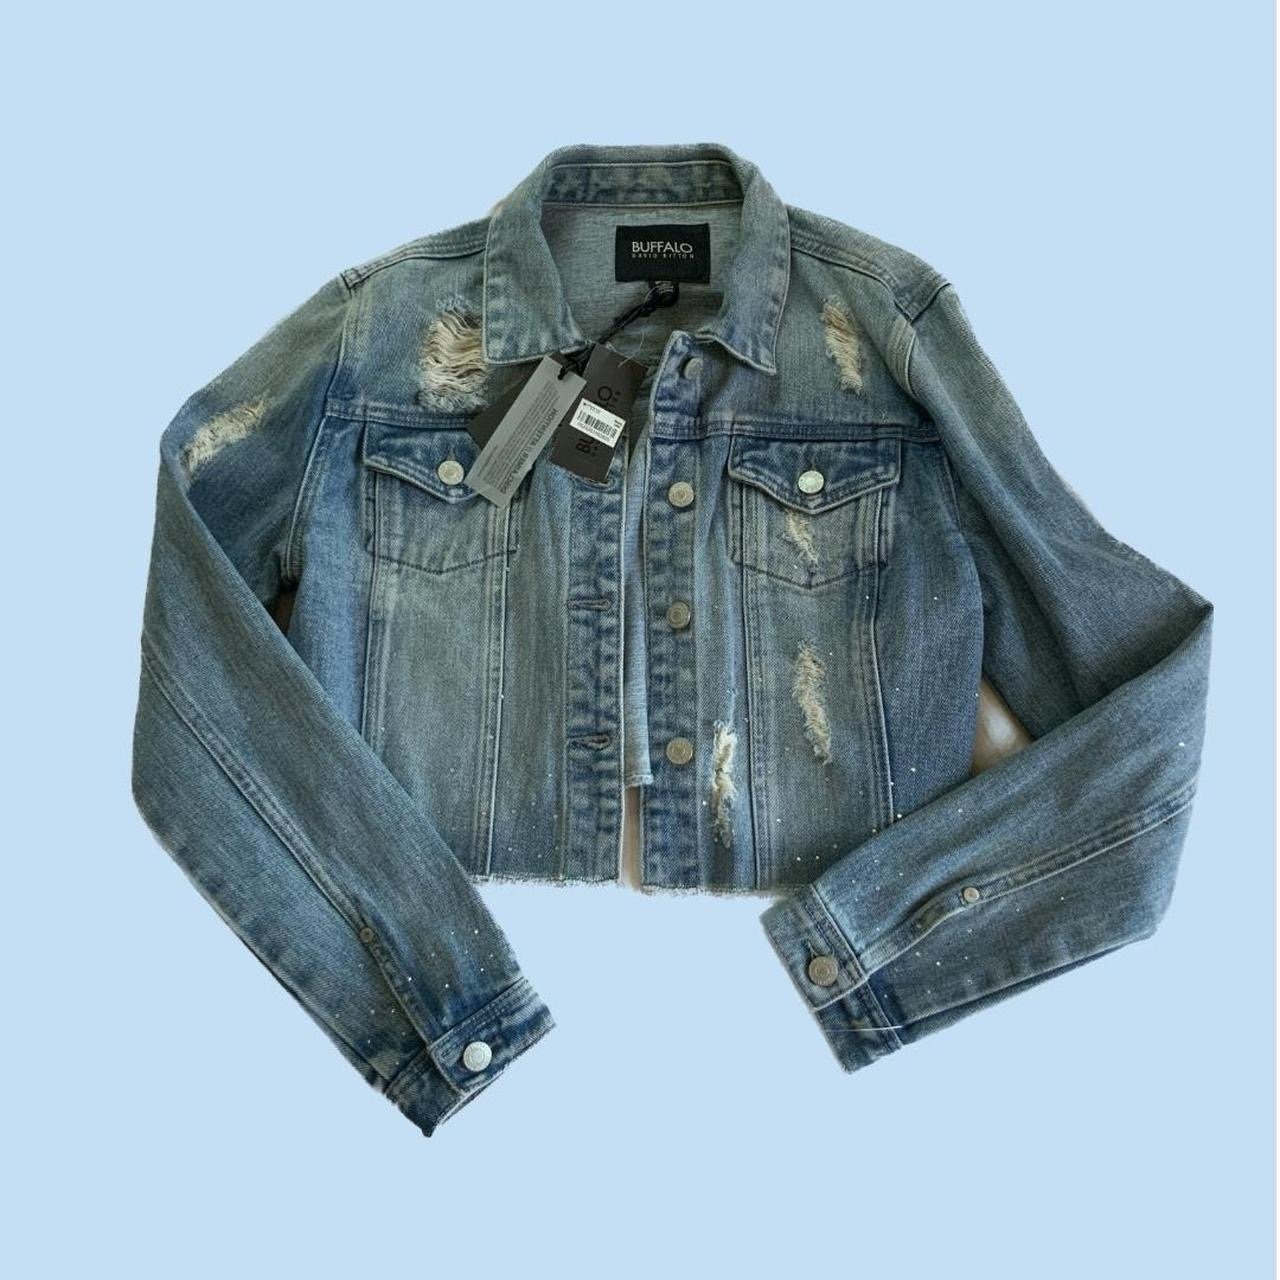 Perfect NWT Buffalo David Bitton Women’s Denim Jean Jacket with Sparkles and Rips Os0LBDQQ5 just for you